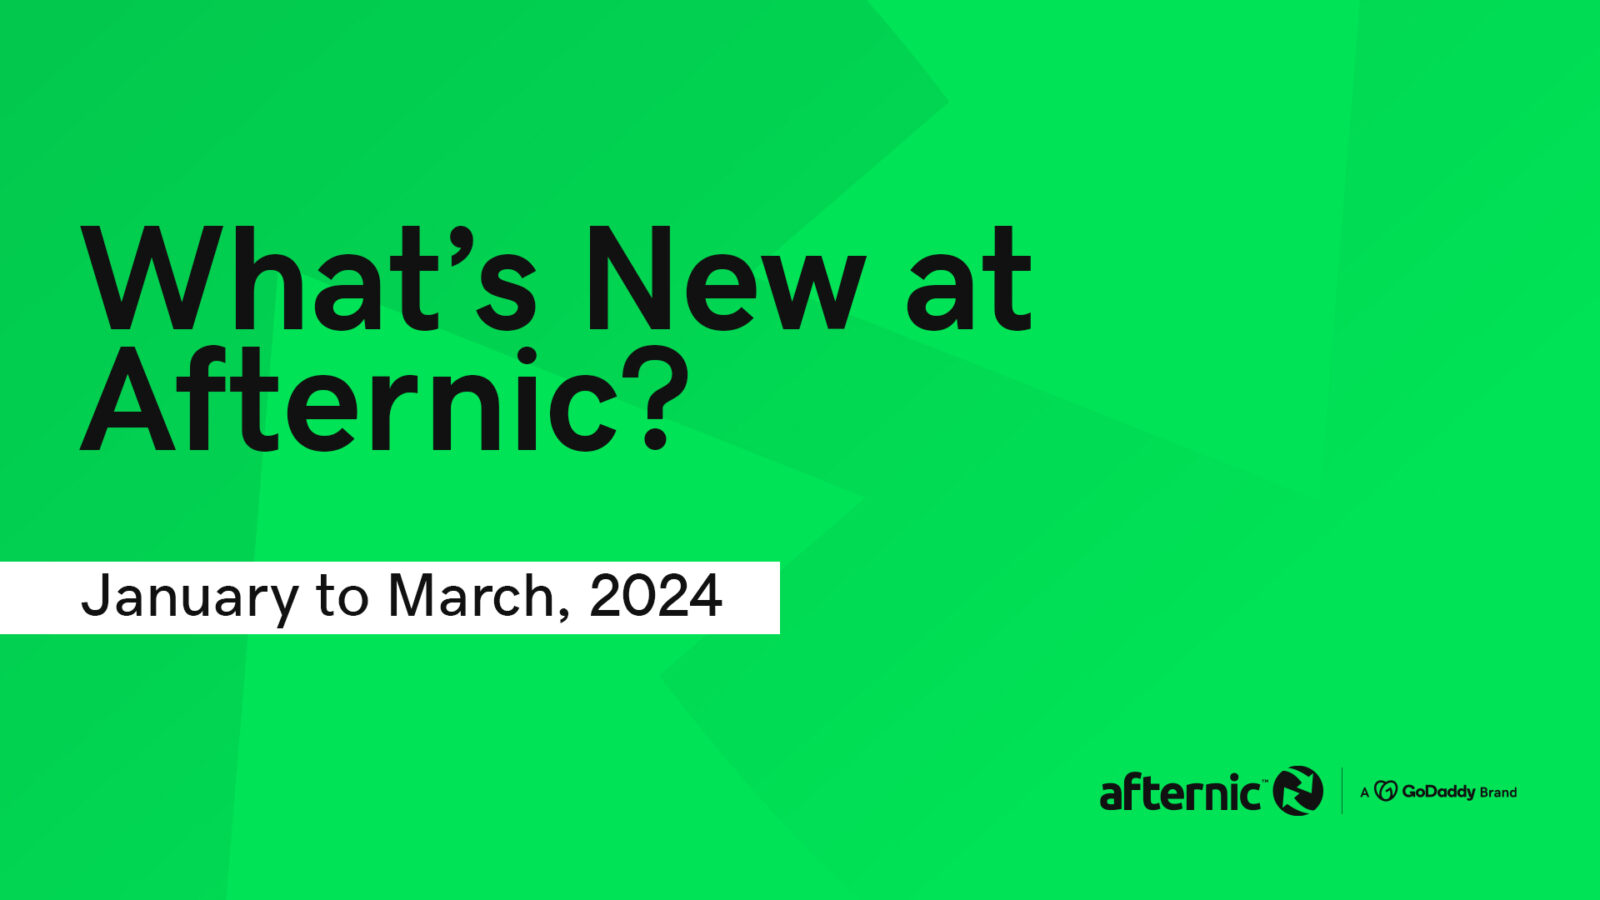 What's new at Afternic - January to March 2024